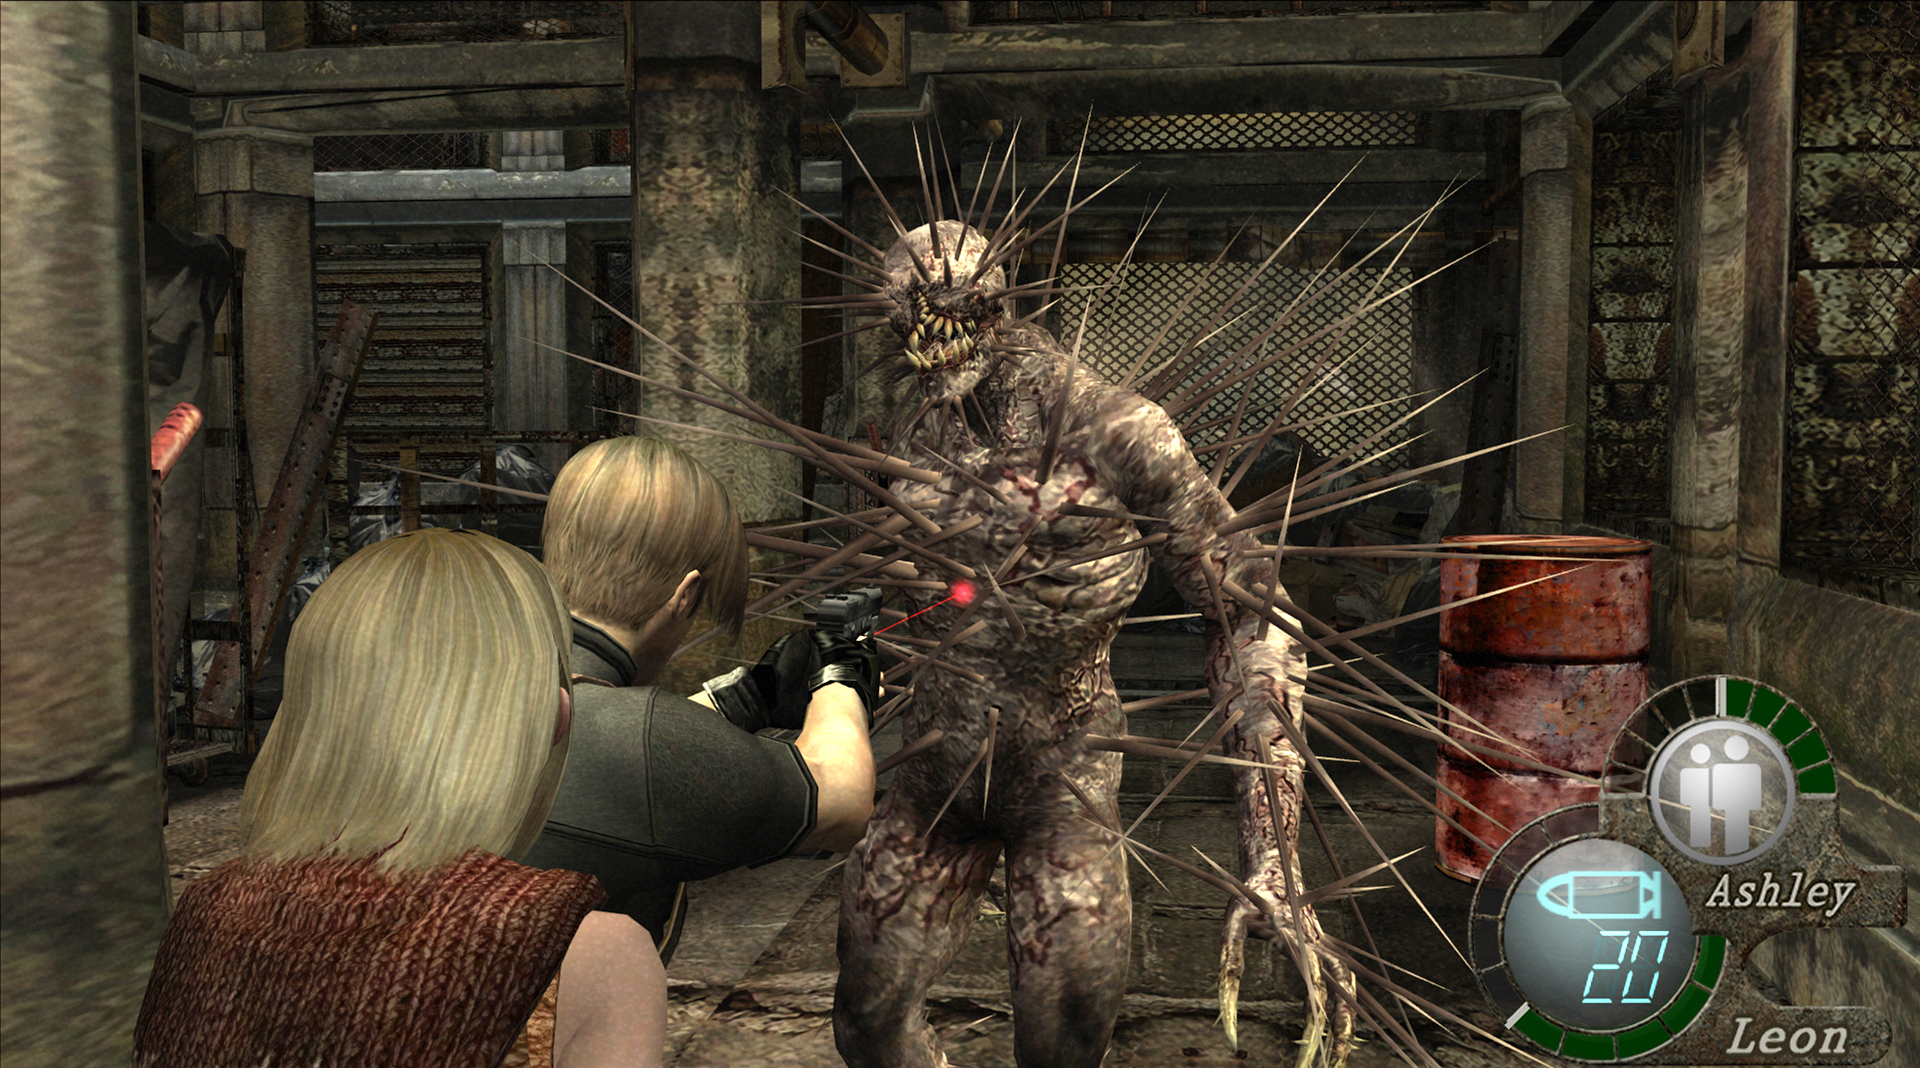 Resident Evil 4 (2014) at the best price